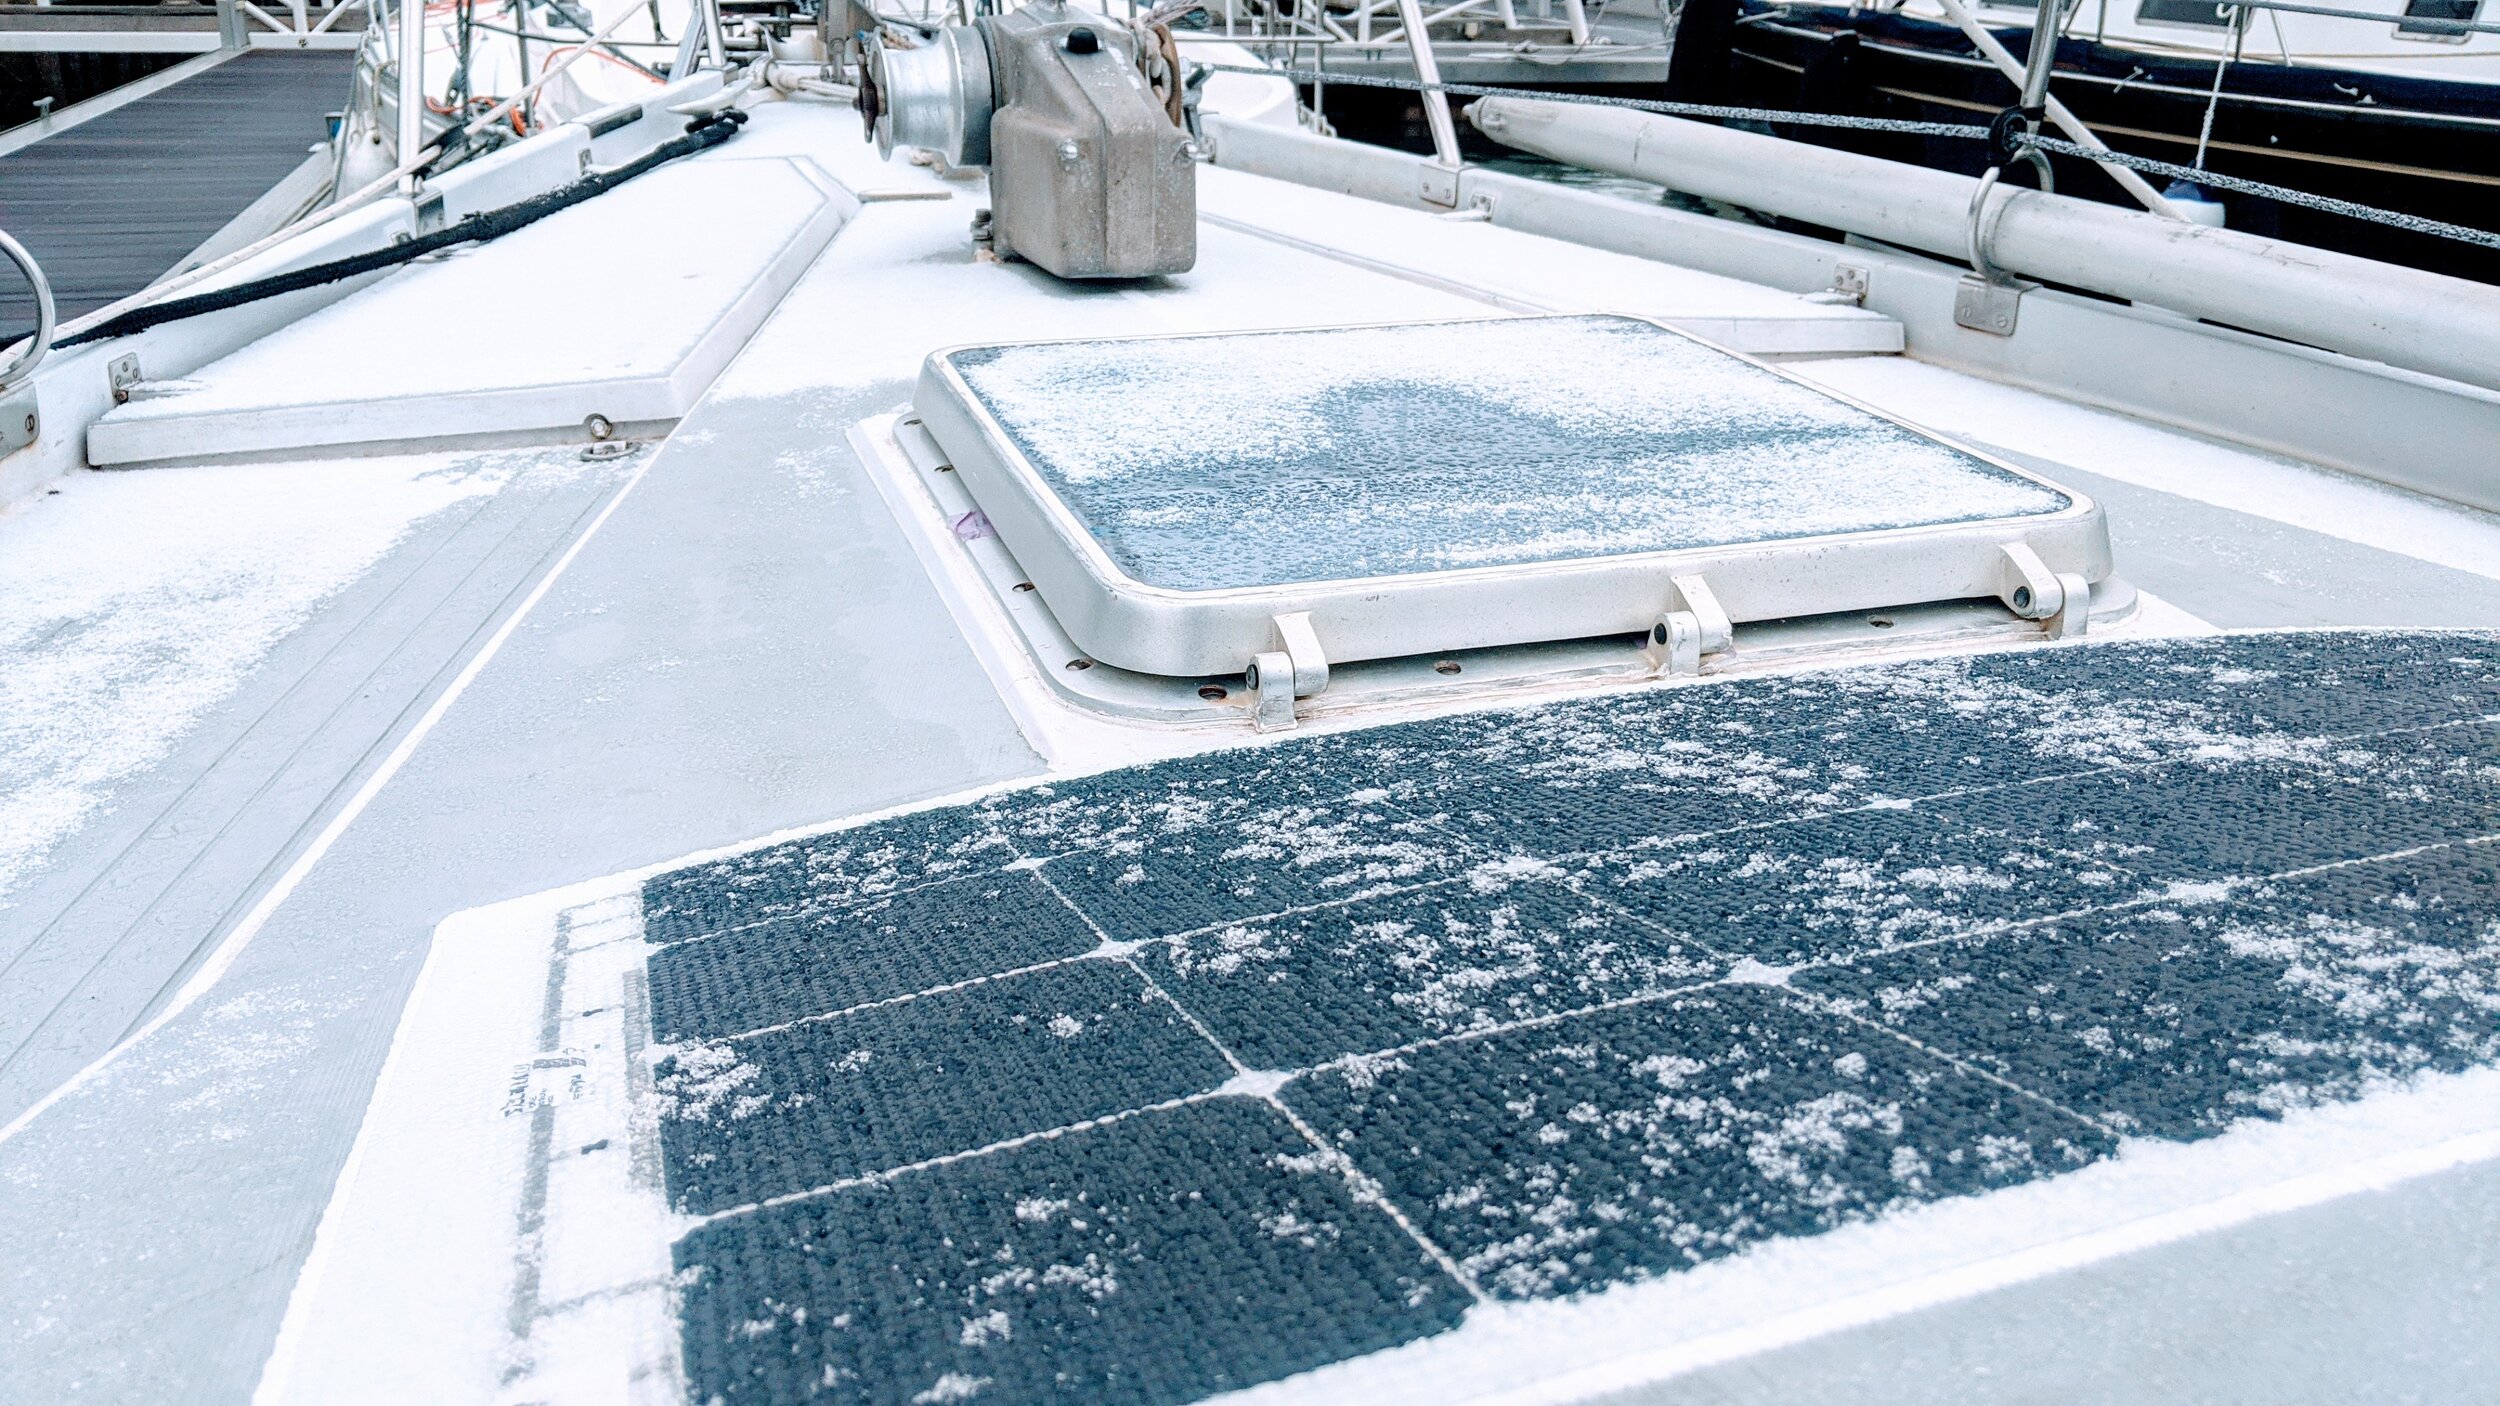 Light snow on one of the new solar panels.